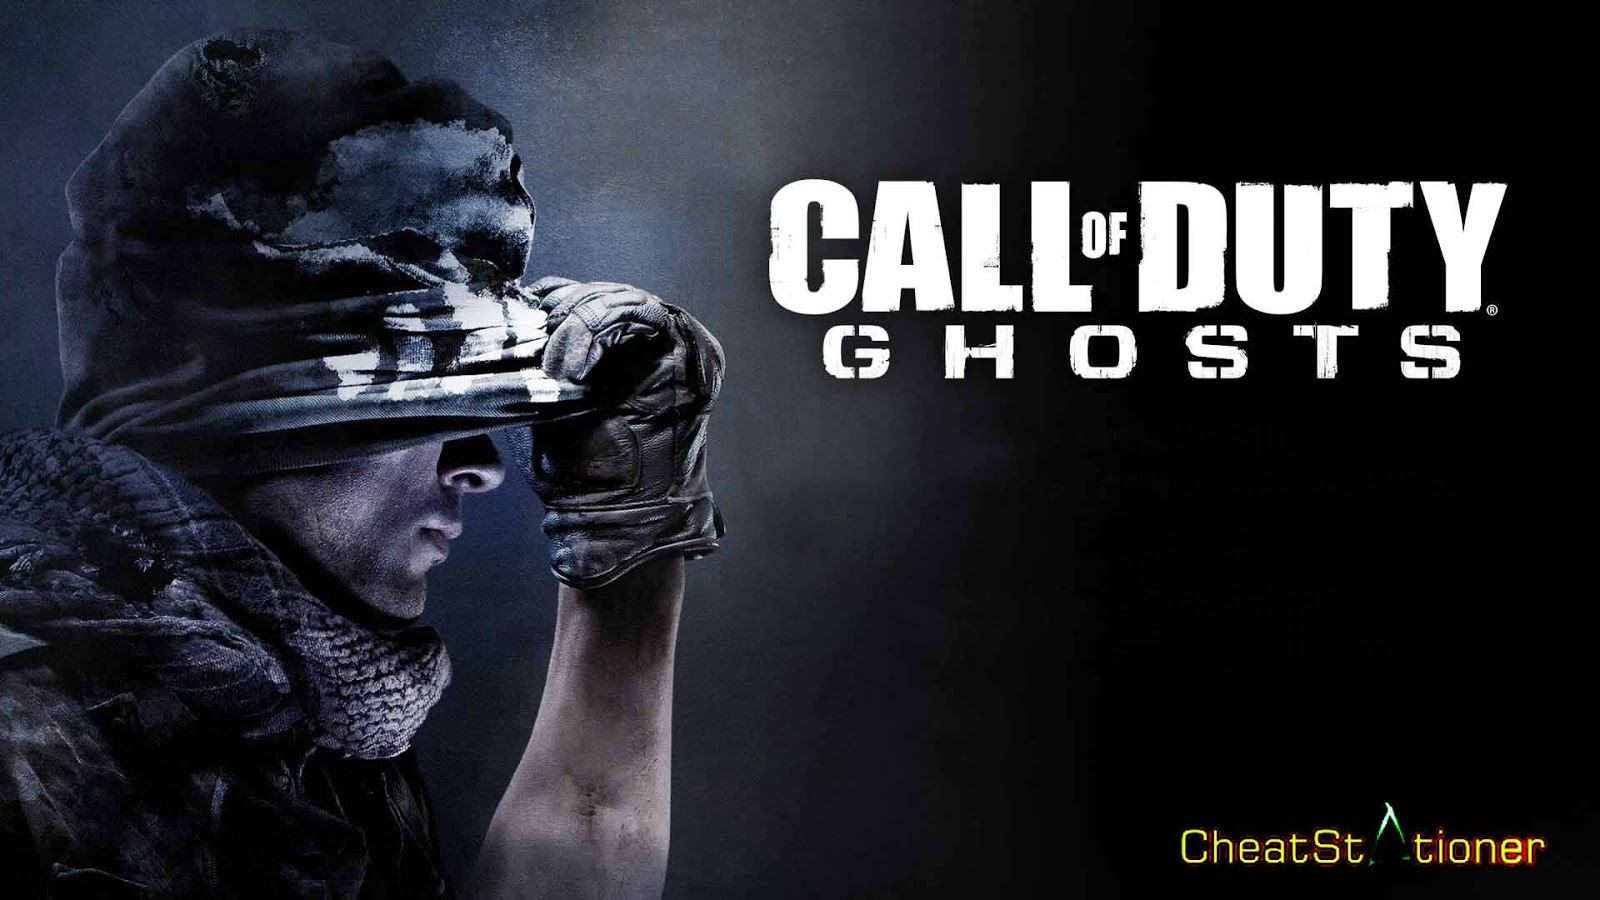 download call of duty ghost ps4